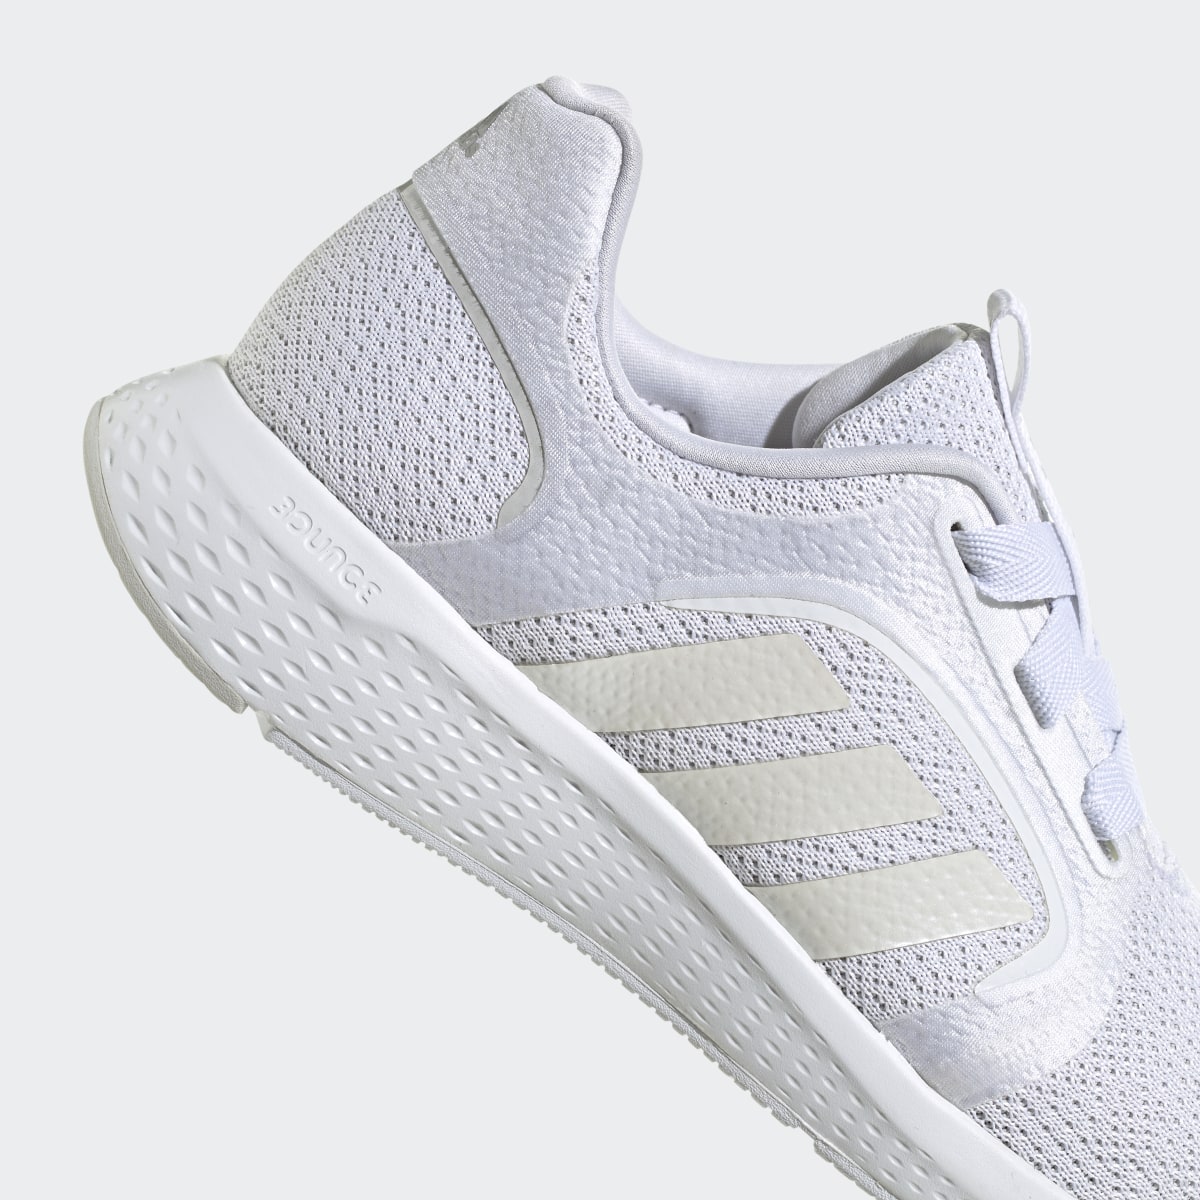 Adidas Edge Lux Shoes. 9